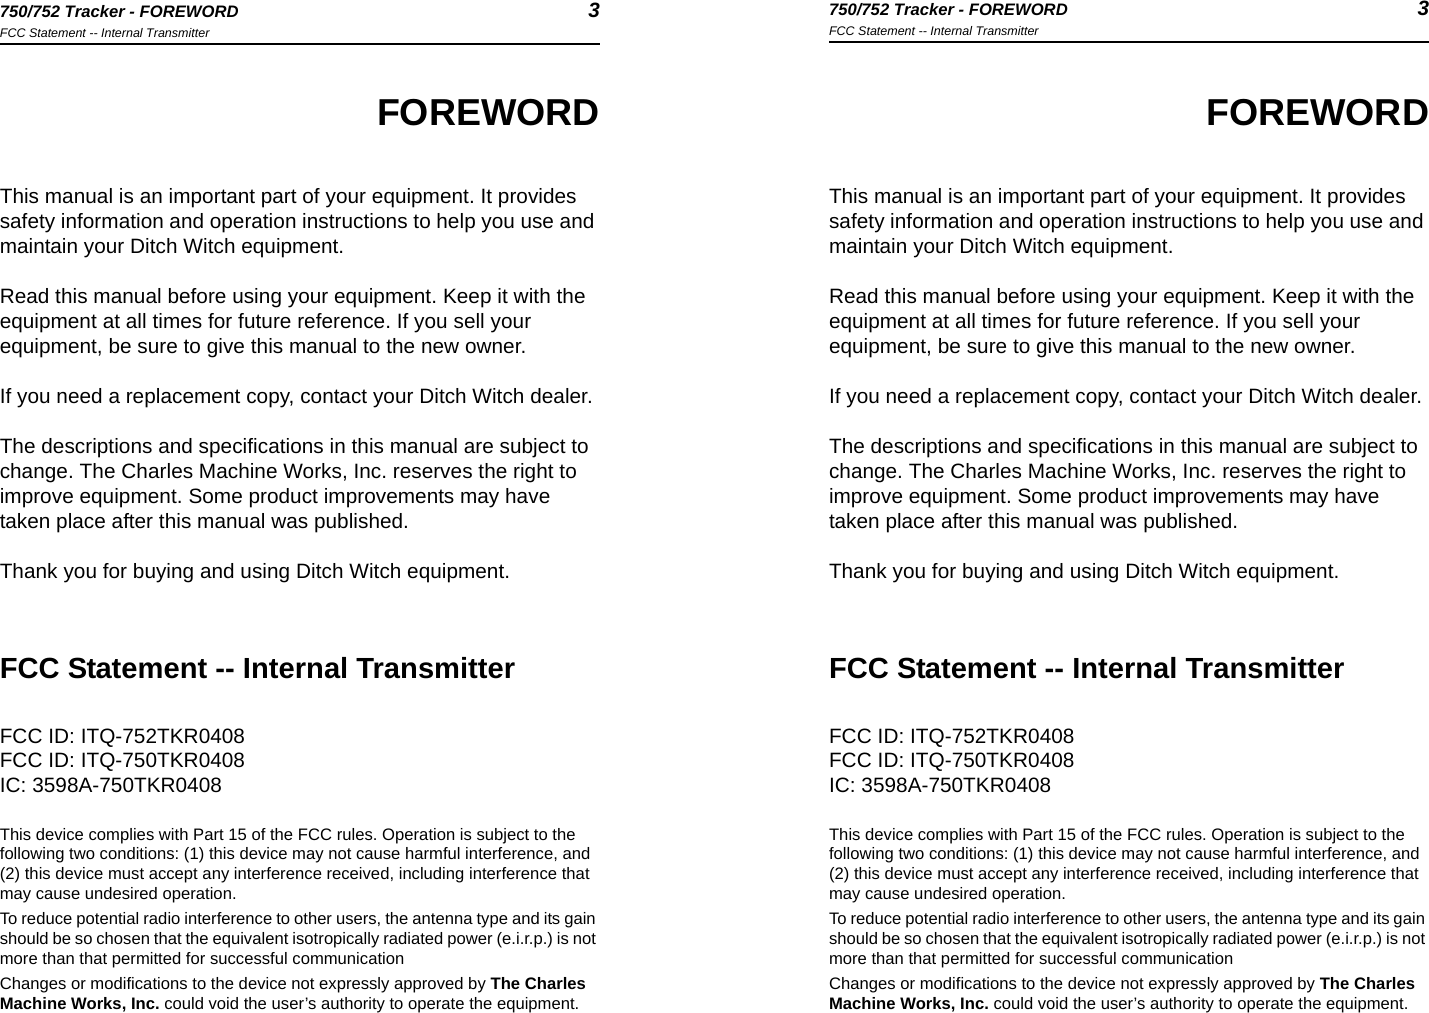 750/752 Tracker - FOREWORD 3FCC Statement -- Internal Transmitter750/752 Tracker - FOREWORD 3FCC Statement -- Internal TransmitterFOREWORDThis manual is an important part of your equipment. It provides safety information and operation instructions to help you use and maintain your Ditch Witch equipment. Read this manual before using your equipment. Keep it with the equipment at all times for future reference. If you sell your equipment, be sure to give this manual to the new owner.If you need a replacement copy, contact your Ditch Witch dealer.The descriptions and specifications in this manual are subject to change. The Charles Machine Works, Inc. reserves the right to improve equipment. Some product improvements may have taken place after this manual was published.Thank you for buying and using Ditch Witch equipment.FCC Statement -- Internal TransmitterFCC ID: ITQ-752TKR0408FCC ID: ITQ-750TKR0408IC: 3598A-750TKR0408This device complies with Part 15 of the FCC rules. Operation is subject to the following two conditions: (1) this device may not cause harmful interference, and (2) this device must accept any interference received, including interference that may cause undesired operation.To reduce potential radio interference to other users, the antenna type and its gain should be so chosen that the equivalent isotropically radiated power (e.i.r.p.) is not more than that permitted for successful communicationChanges or modifications to the device not expressly approved by The Charles Machine Works, Inc. could void the user’s authority to operate the equipment.FOREWORDThis manual is an important part of your equipment. It provides safety information and operation instructions to help you use and maintain your Ditch Witch equipment. Read this manual before using your equipment. Keep it with the equipment at all times for future reference. If you sell your equipment, be sure to give this manual to the new owner.If you need a replacement copy, contact your Ditch Witch dealer.The descriptions and specifications in this manual are subject to change. The Charles Machine Works, Inc. reserves the right to improve equipment. Some product improvements may have taken place after this manual was published.Thank you for buying and using Ditch Witch equipment.FCC Statement -- Internal TransmitterFCC ID: ITQ-752TKR0408FCC ID: ITQ-750TKR0408IC: 3598A-750TKR0408This device complies with Part 15 of the FCC rules. Operation is subject to the following two conditions: (1) this device may not cause harmful interference, and (2) this device must accept any interference received, including interference that may cause undesired operation.To reduce potential radio interference to other users, the antenna type and its gain should be so chosen that the equivalent isotropically radiated power (e.i.r.p.) is not more than that permitted for successful communicationChanges or modifications to the device not expressly approved by The Charles Machine Works, Inc. could void the user’s authority to operate the equipment.